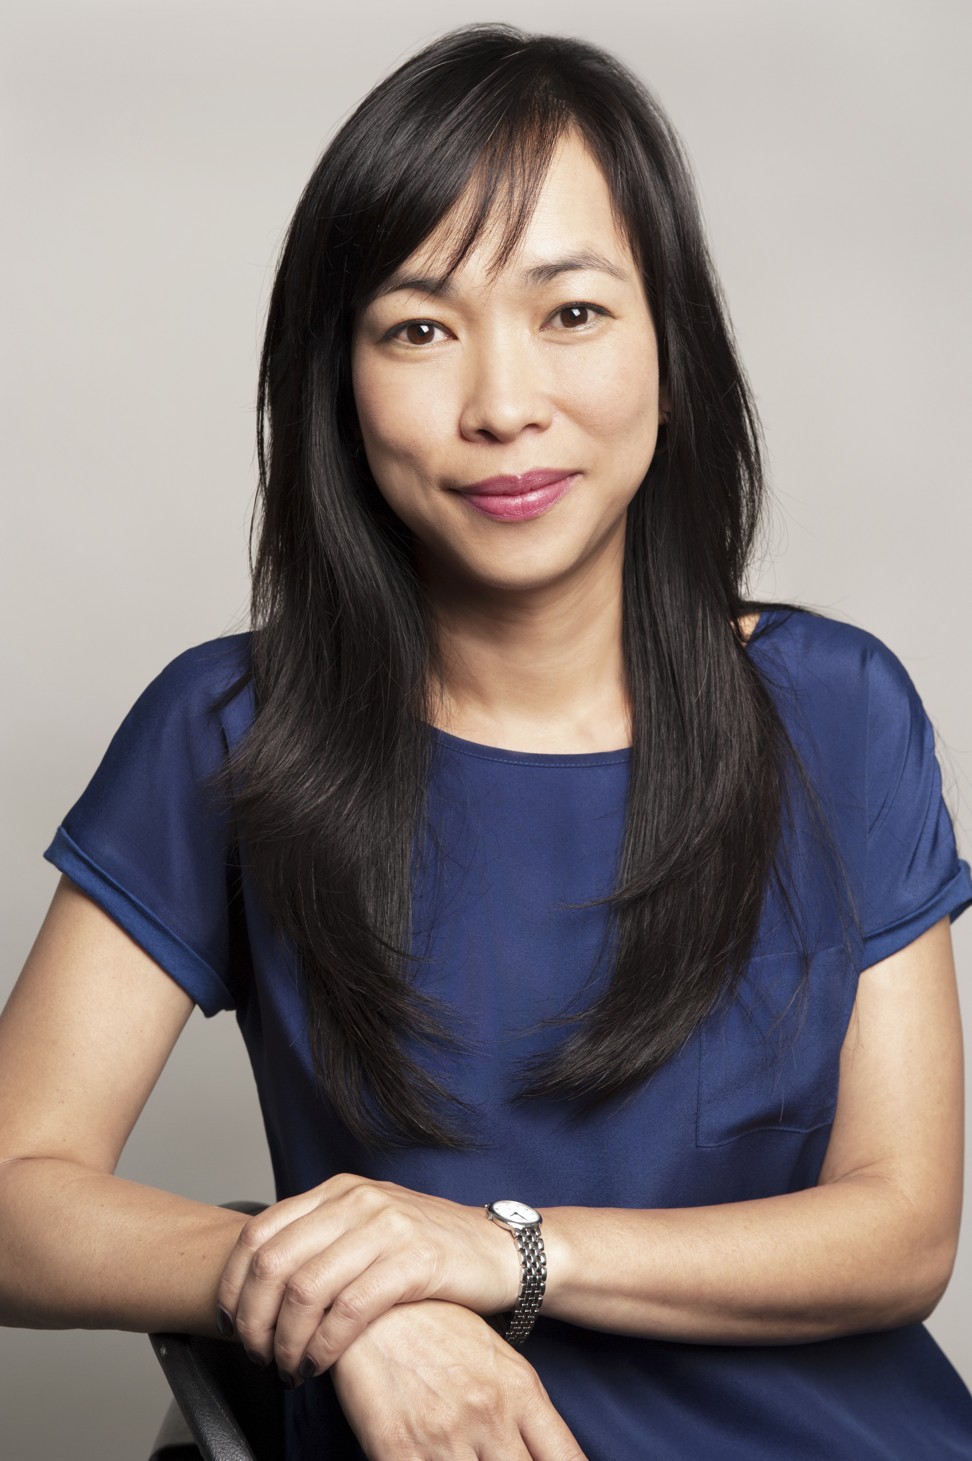 Joyce Chao is a clinical psychologist at Dimensions Centre in Central, Hong Kong.